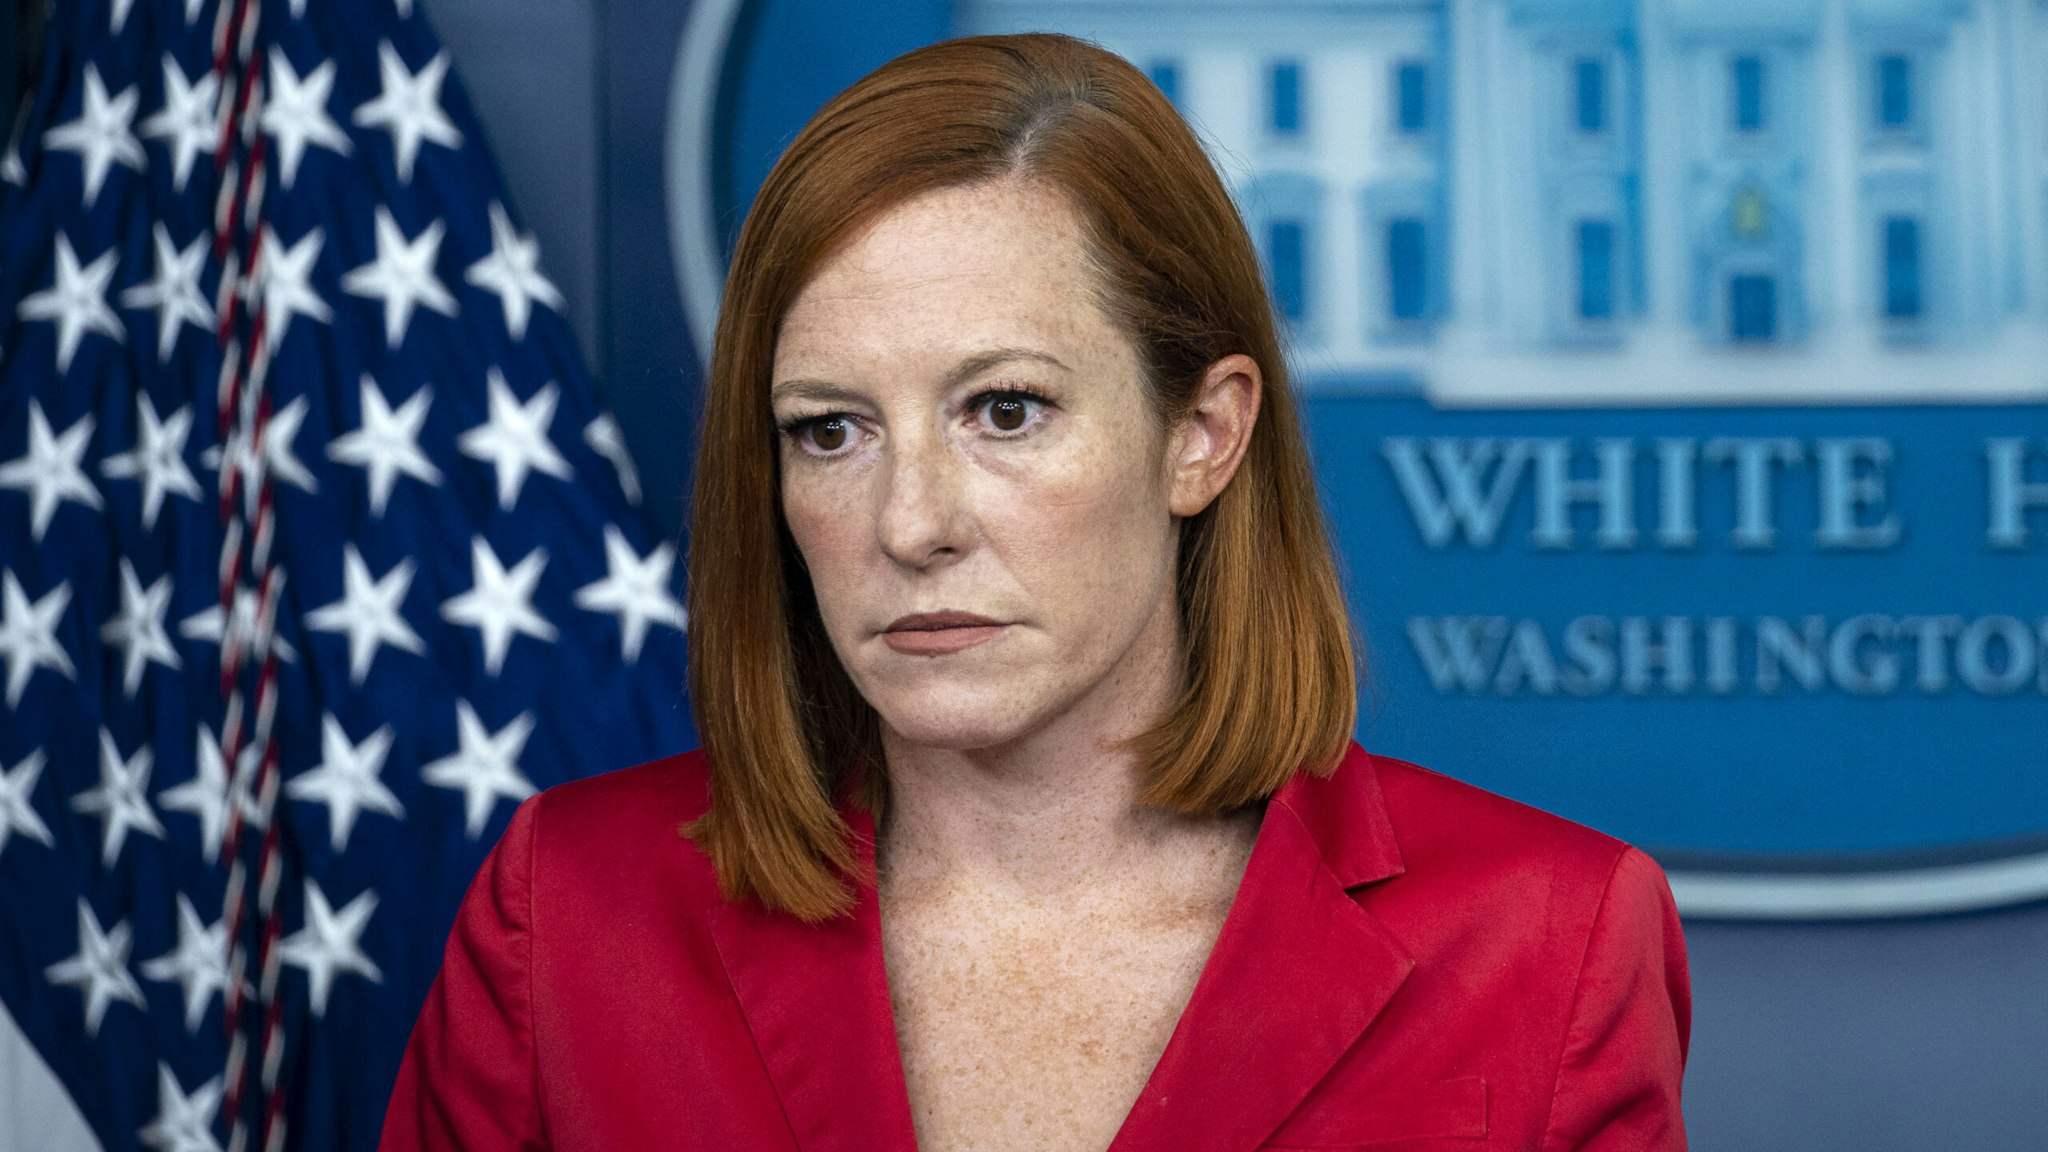 Jen Psaki, White House press secretary, during a news conference in the James S. Brady Press Briefing Room at the White House in Washington, D.C., U.S., on Thursday, Aug. 5, 2021. The Biden administration's decision to give renters affected by the worsening pandemic a two-month eviction reprieve risks pushing a housing crisis into the fall if states fail to accelerate distribution of billions in rent relief.